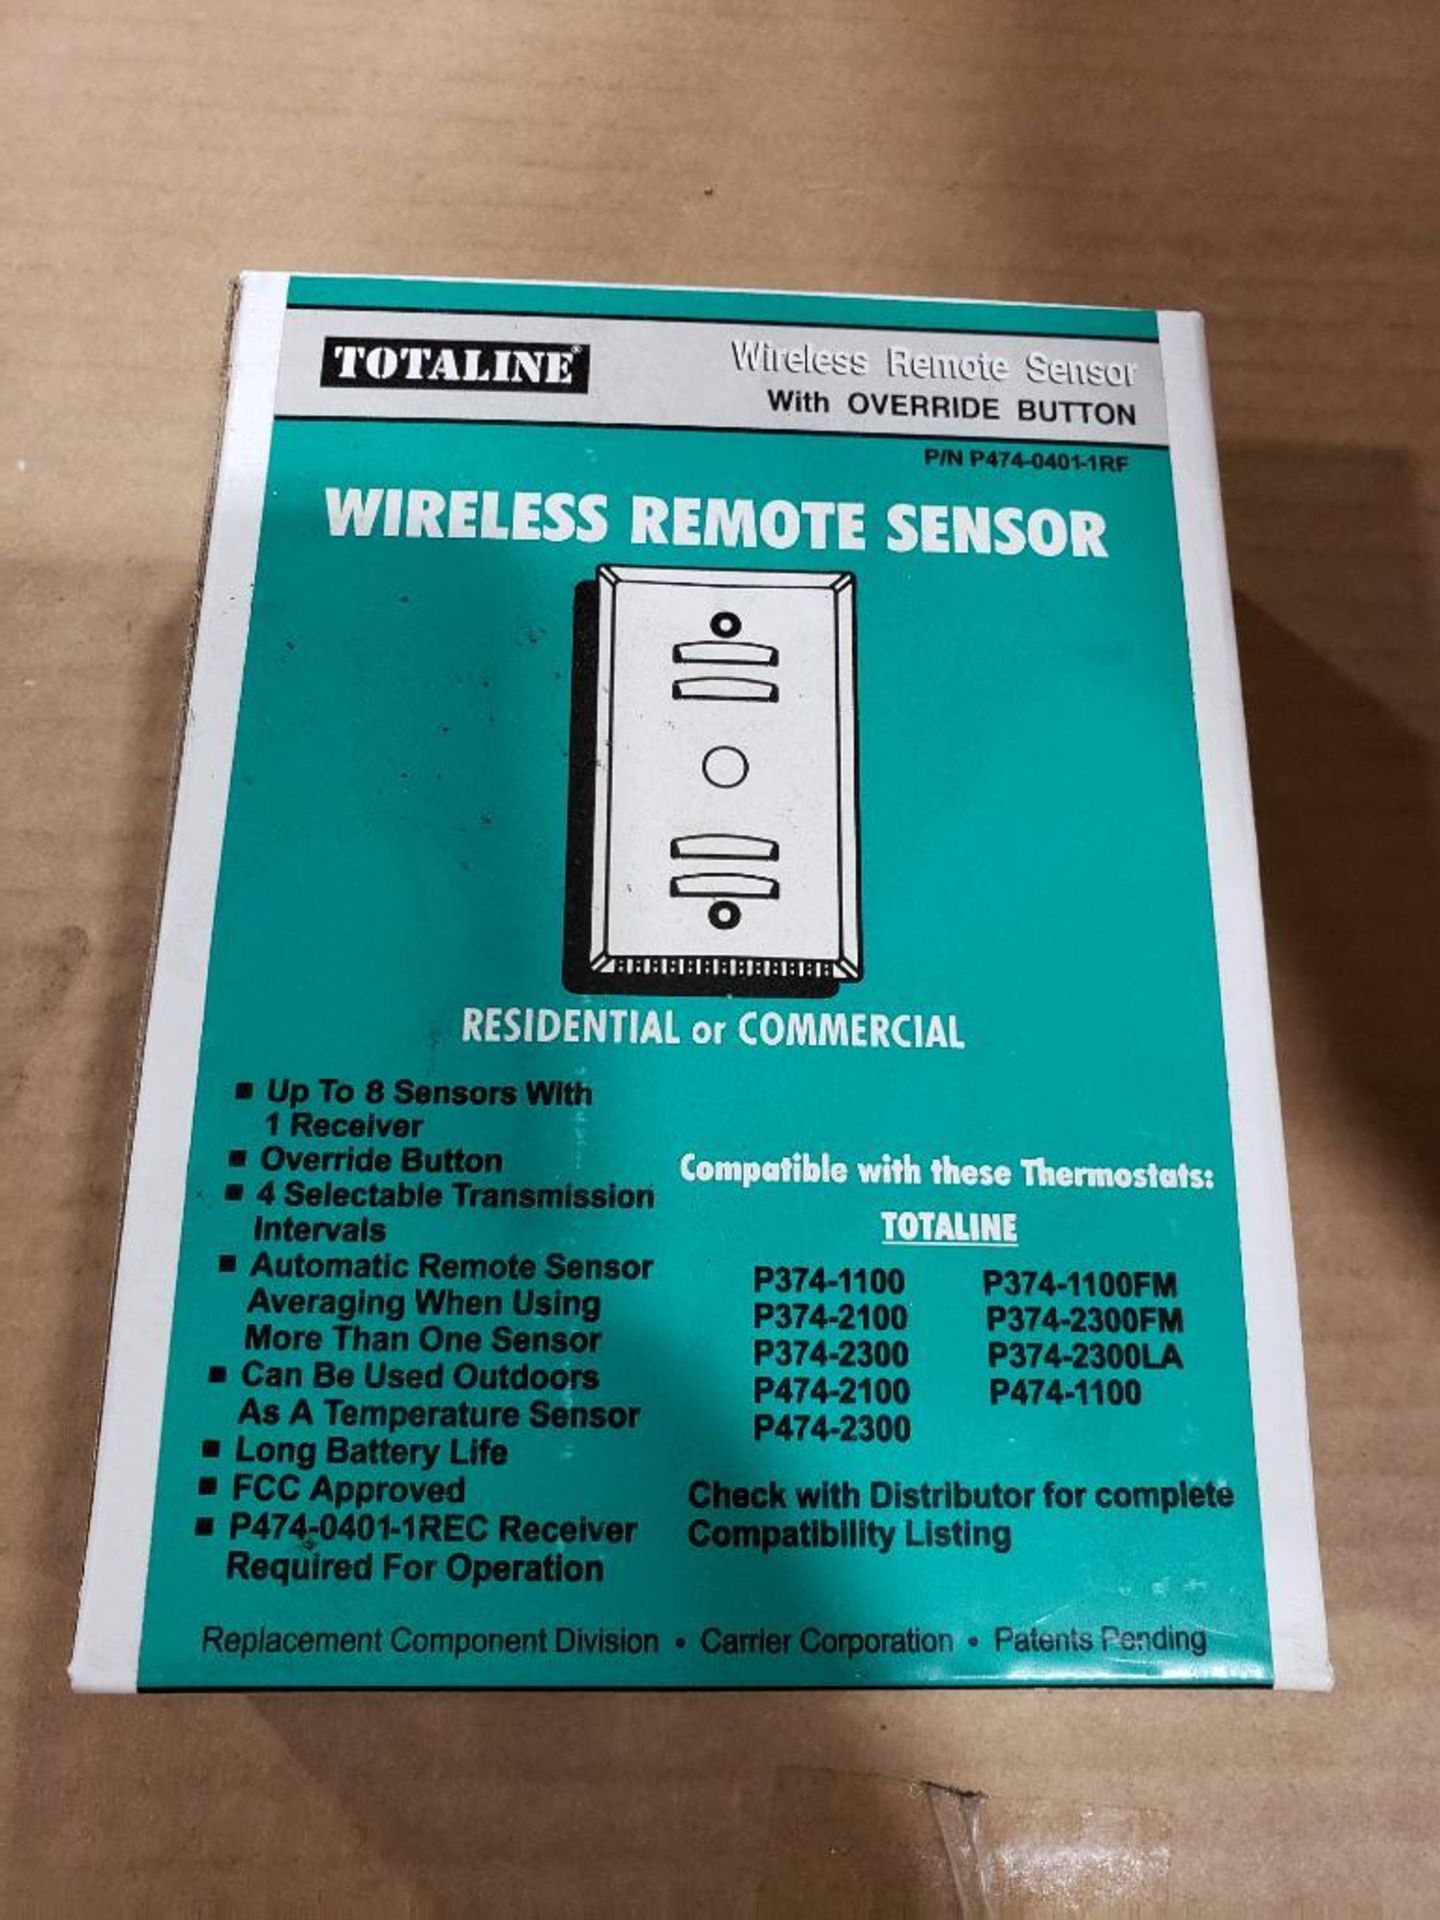 Qty 70 - Totaline wireless remote sensor. Part number P474-0401-1RF. - Image 2 of 4